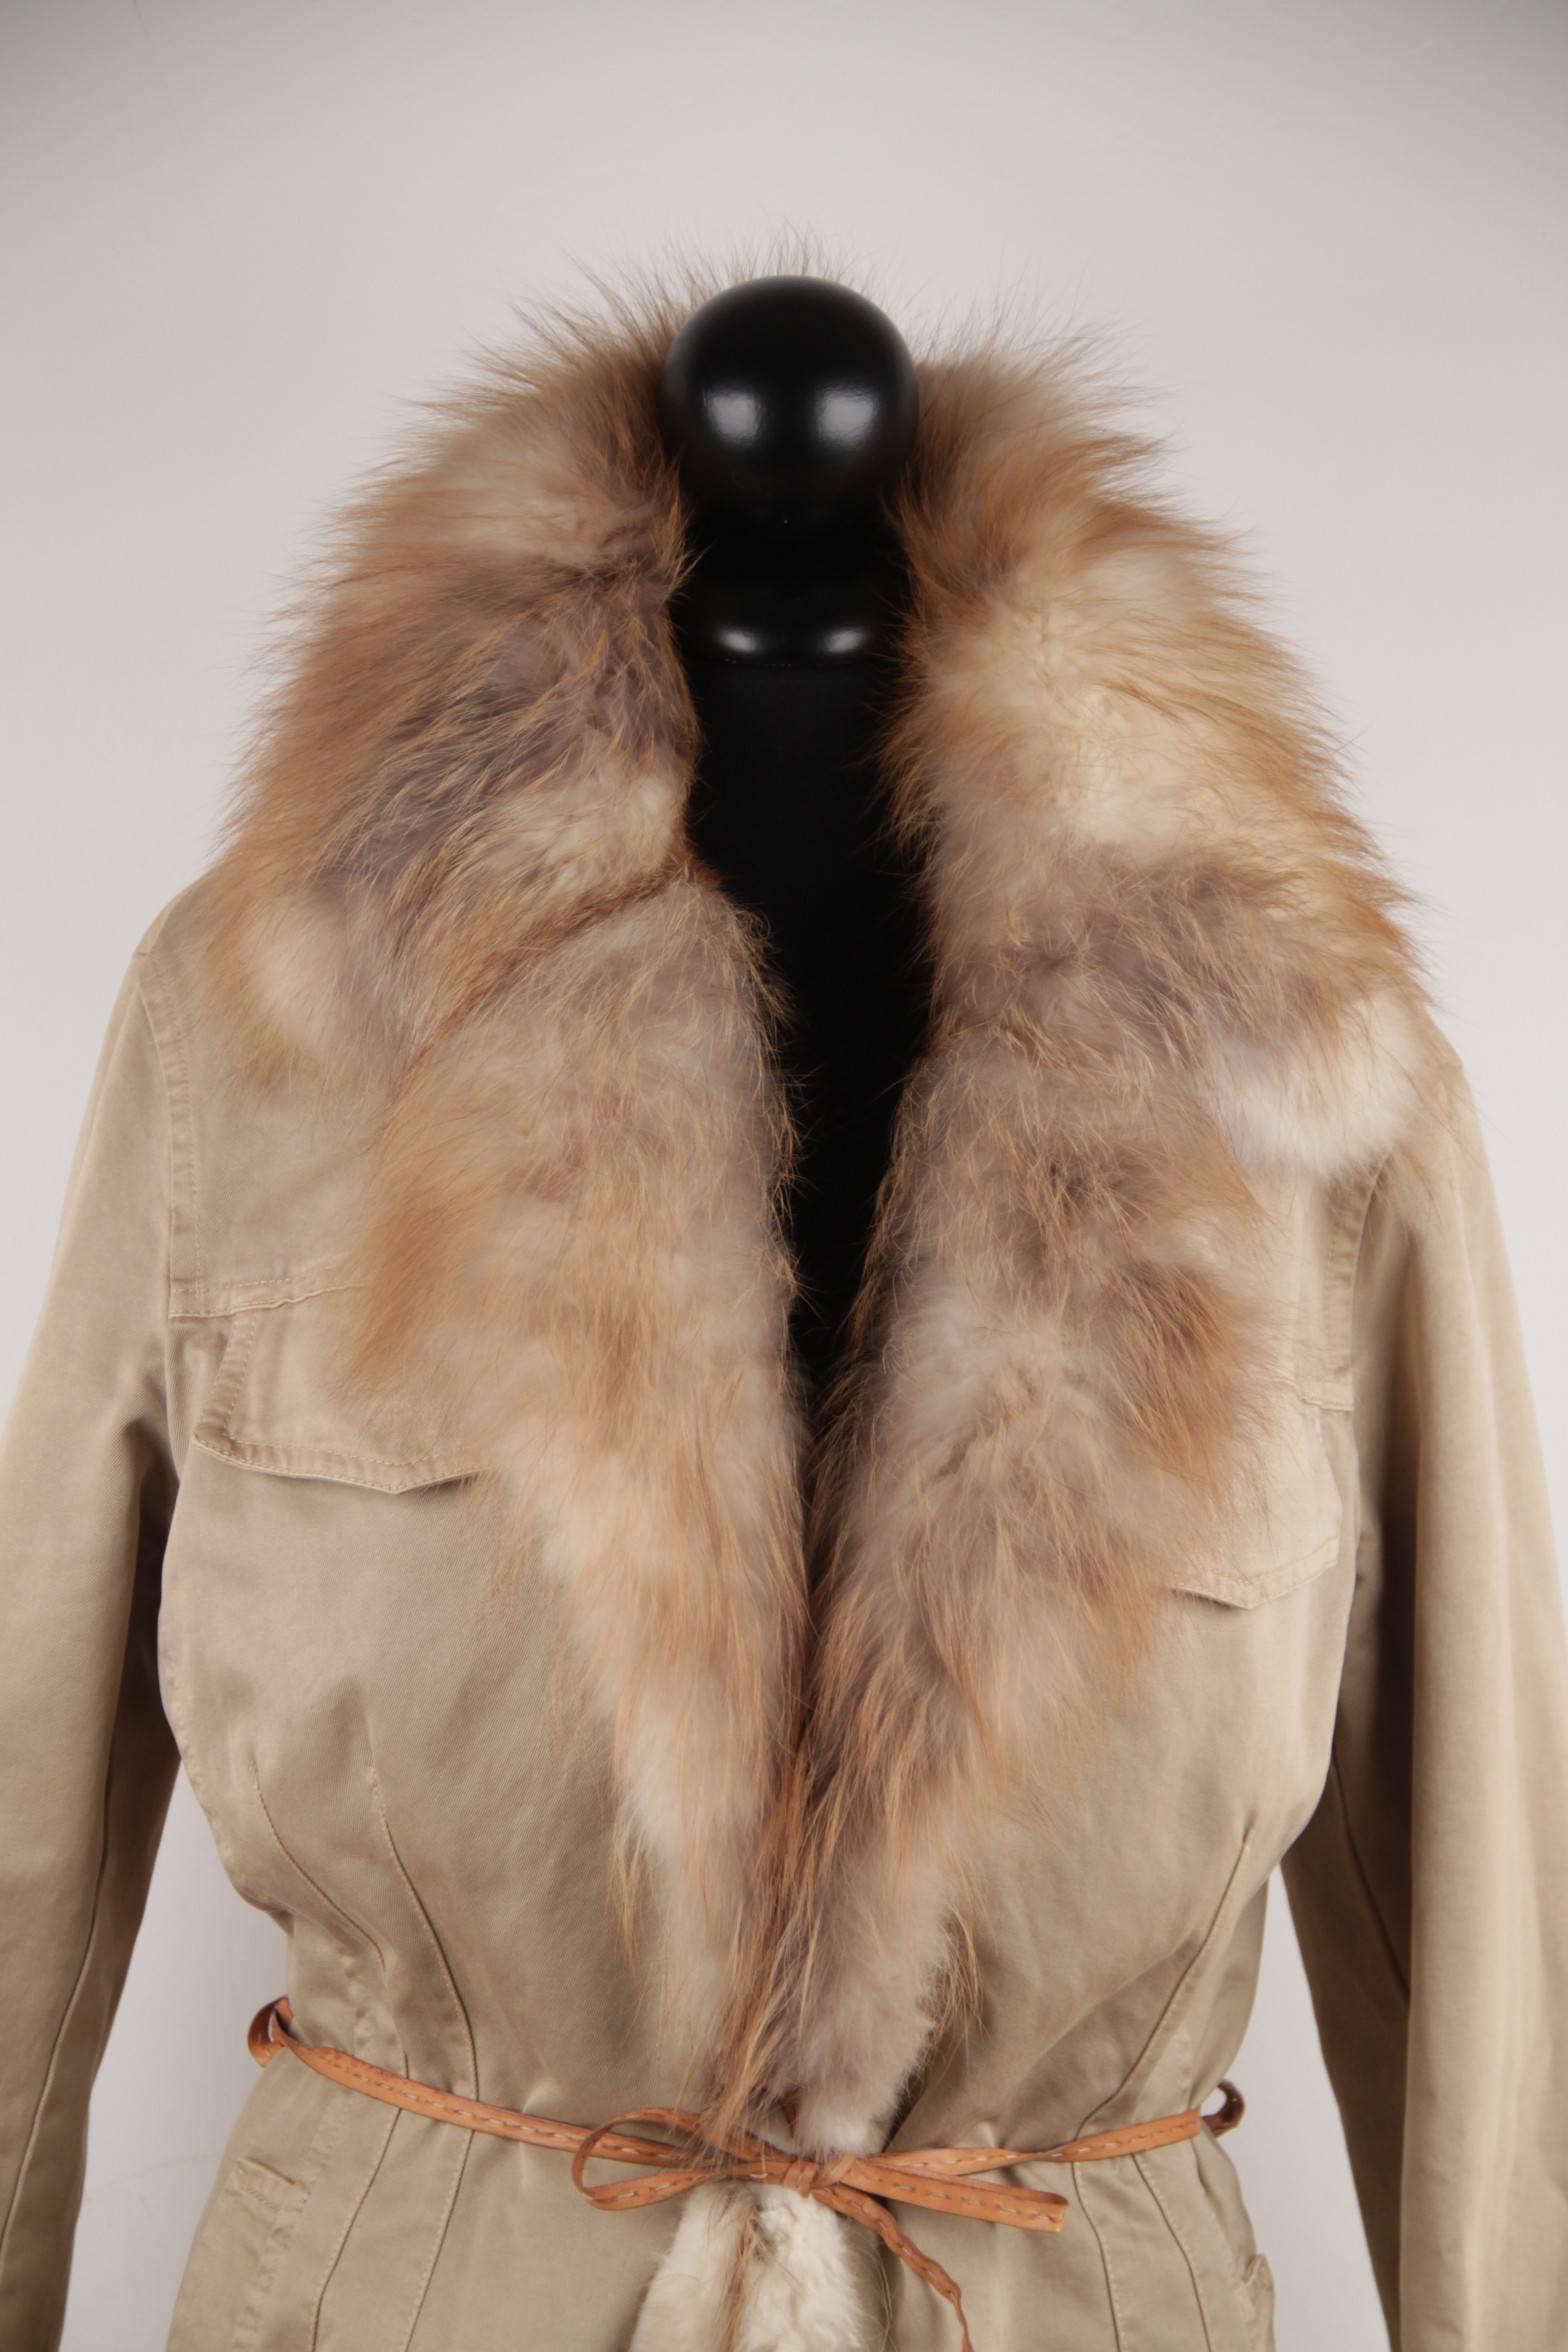 

- Beige color

- Nylon fabric

- Real fox fur trim

- Long sleeve styling

-Open front with leather self-tie belt

- Hooded neckline

- Zip detailing on the sides

- Adjustable Leather half belt on the back

- 2 flap pockets on